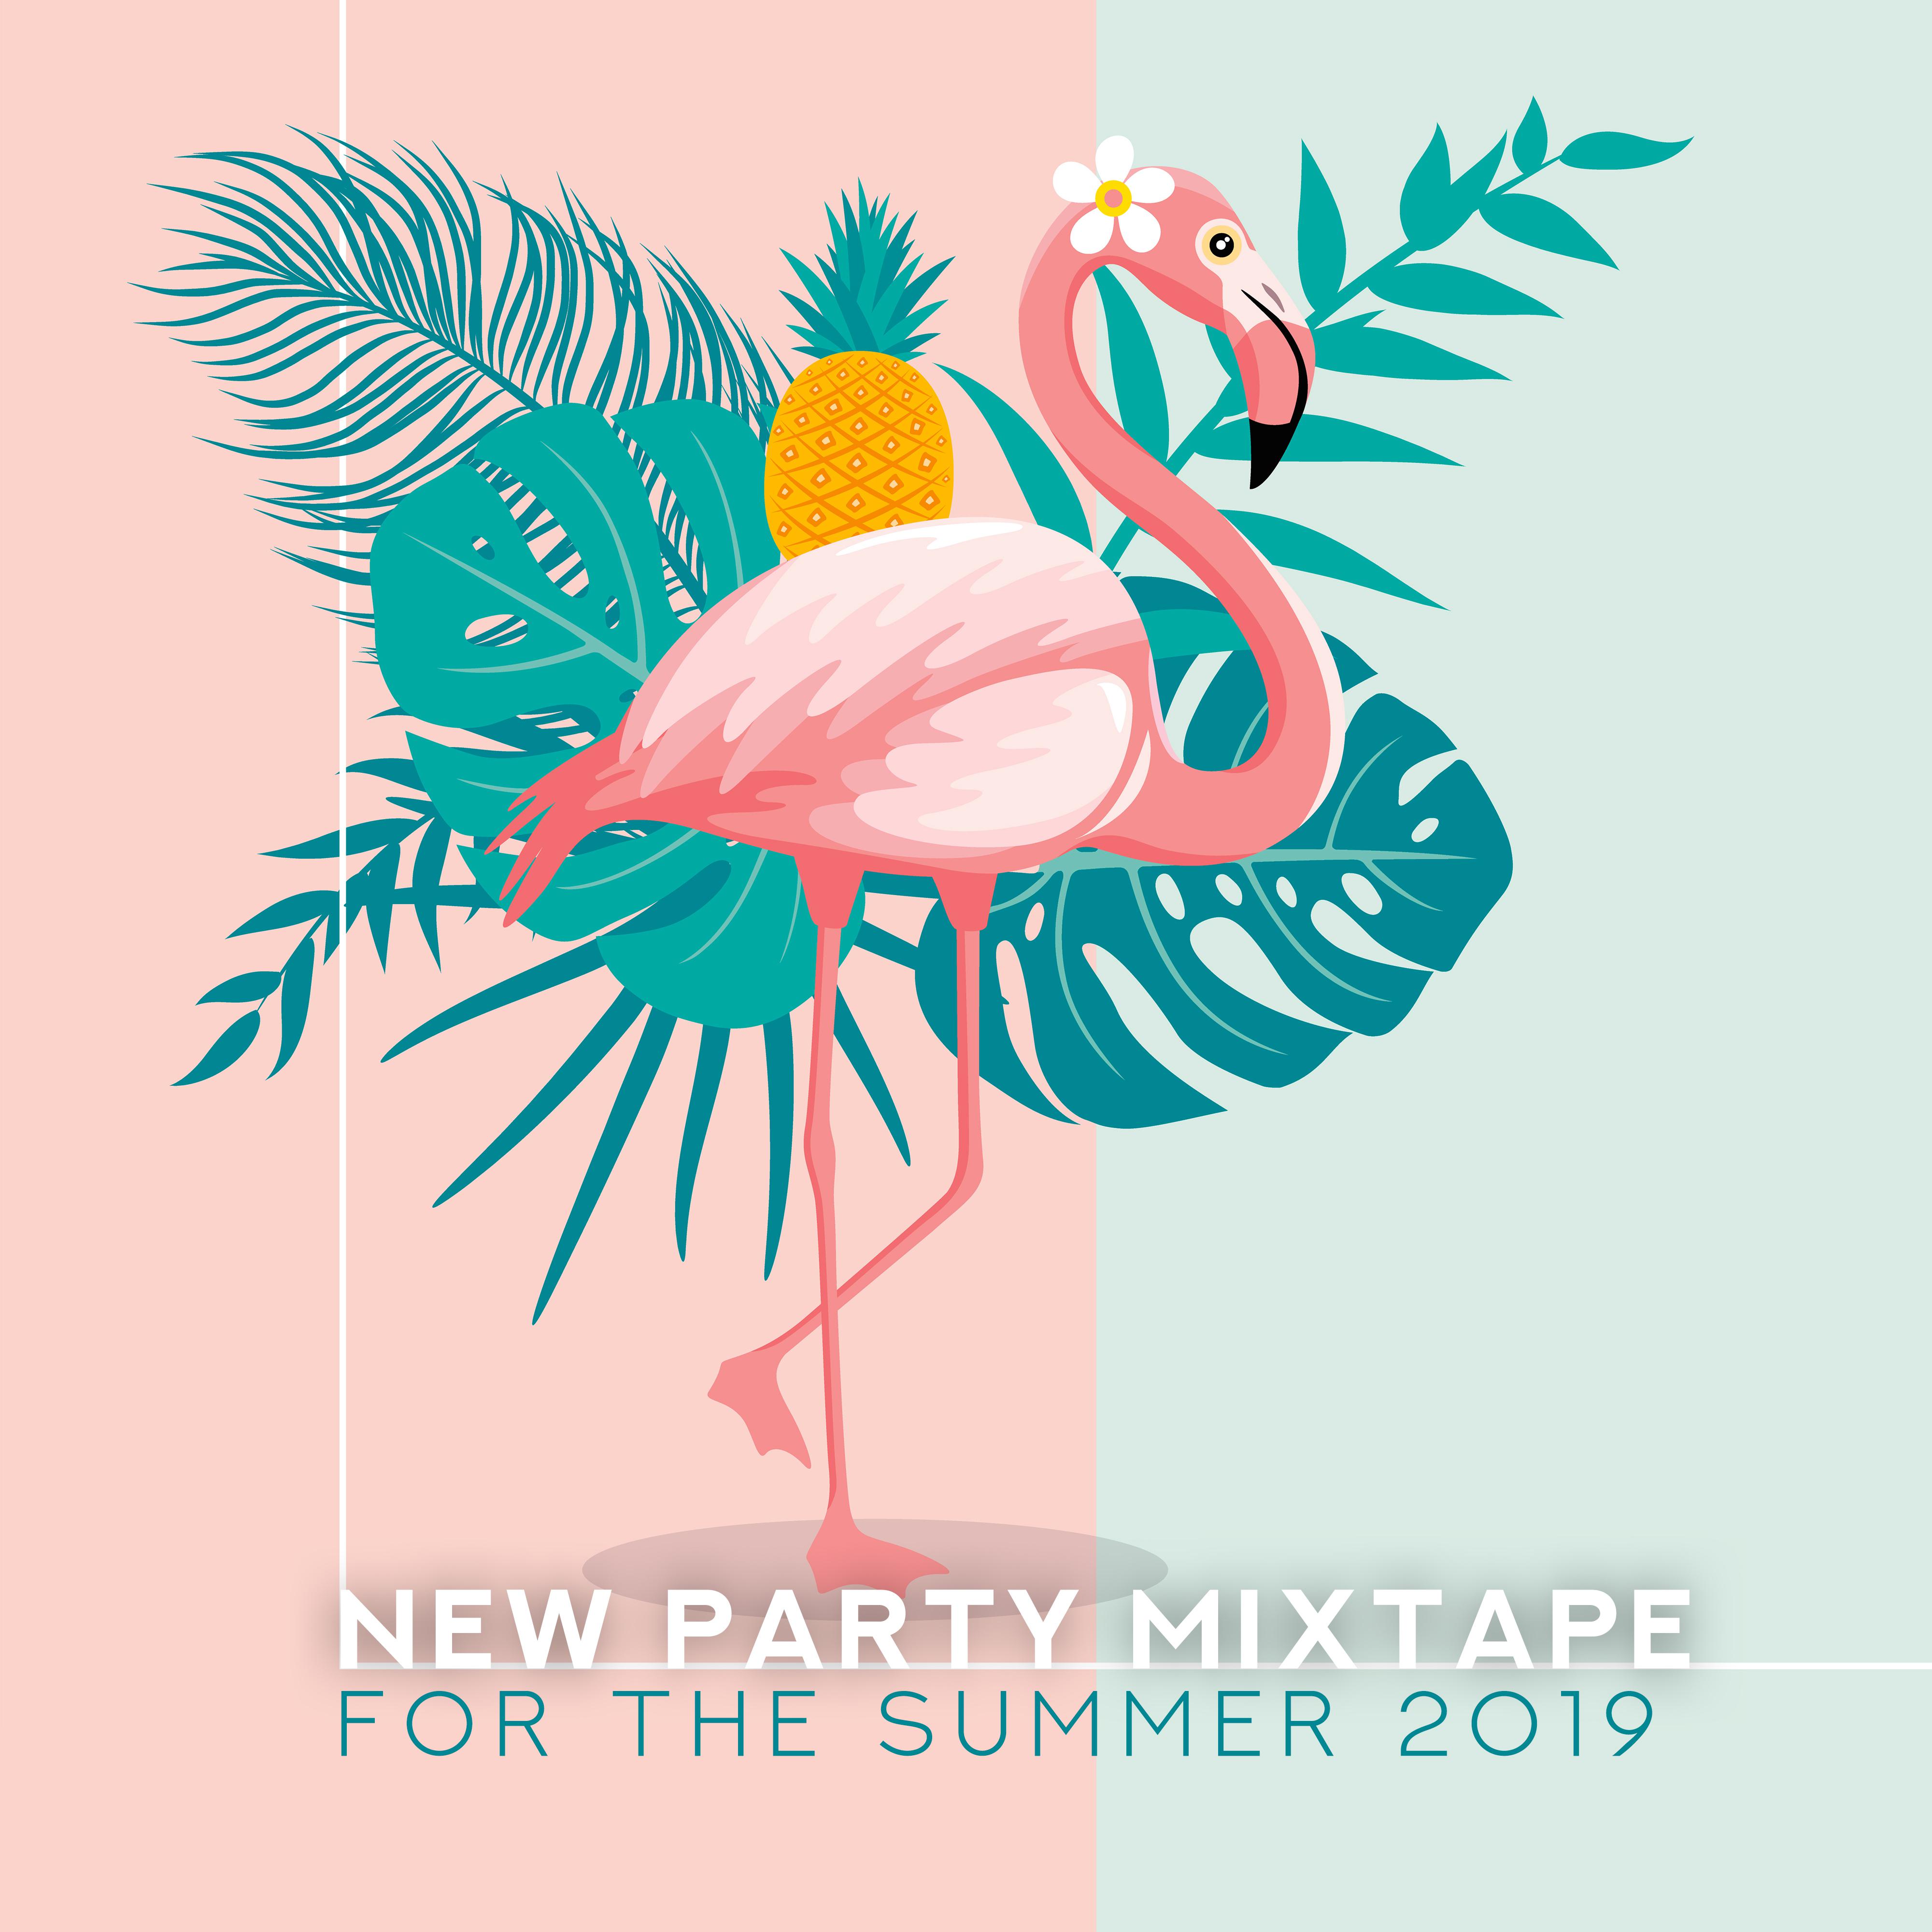 New Party Mixtape for the Summer 2019